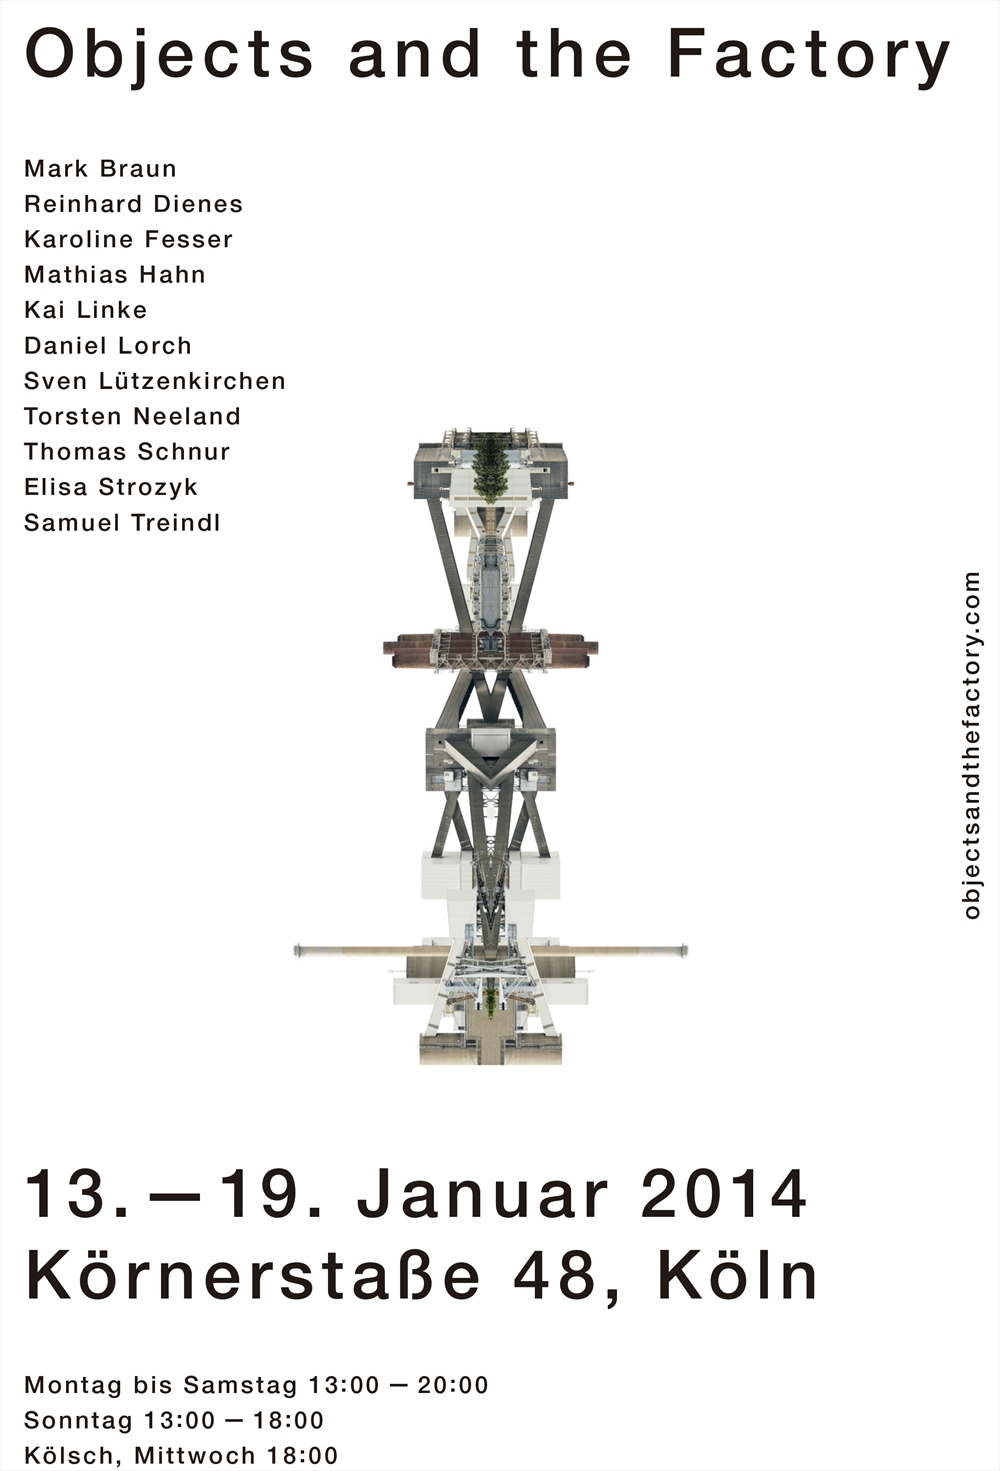 Archisearch - Objects and the Factory 2014 Köln